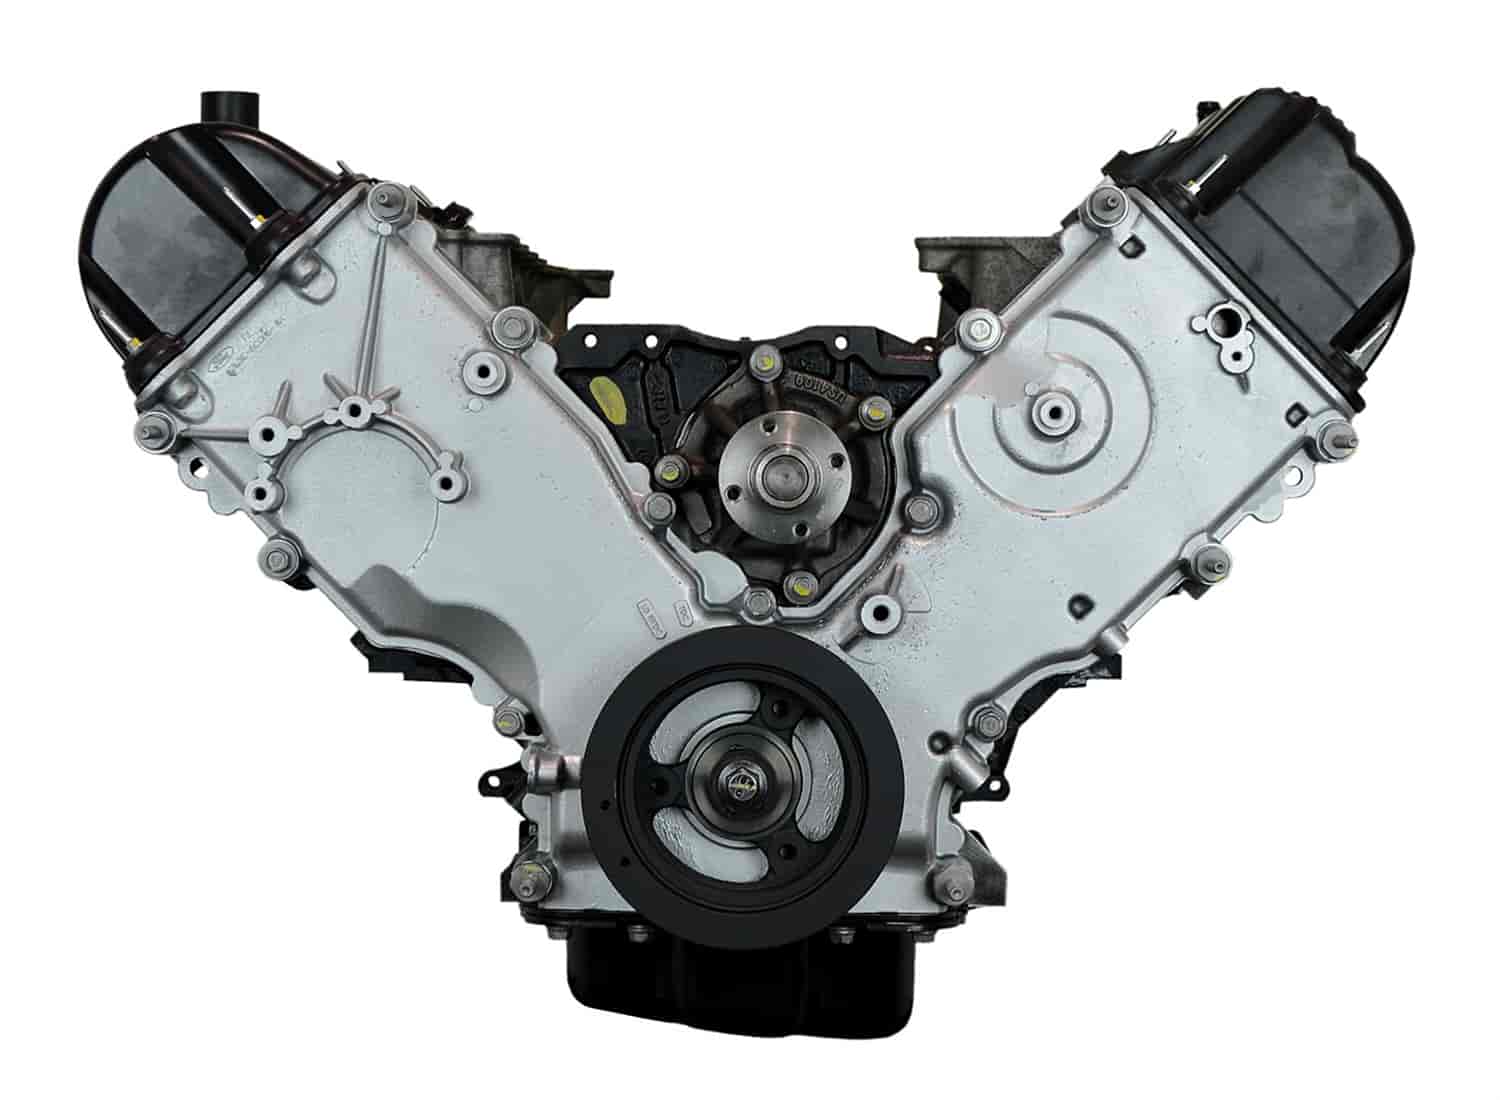 Remanufactured Crate Engine for 2002-2003 Ford E-Series Van with 6.8L V10